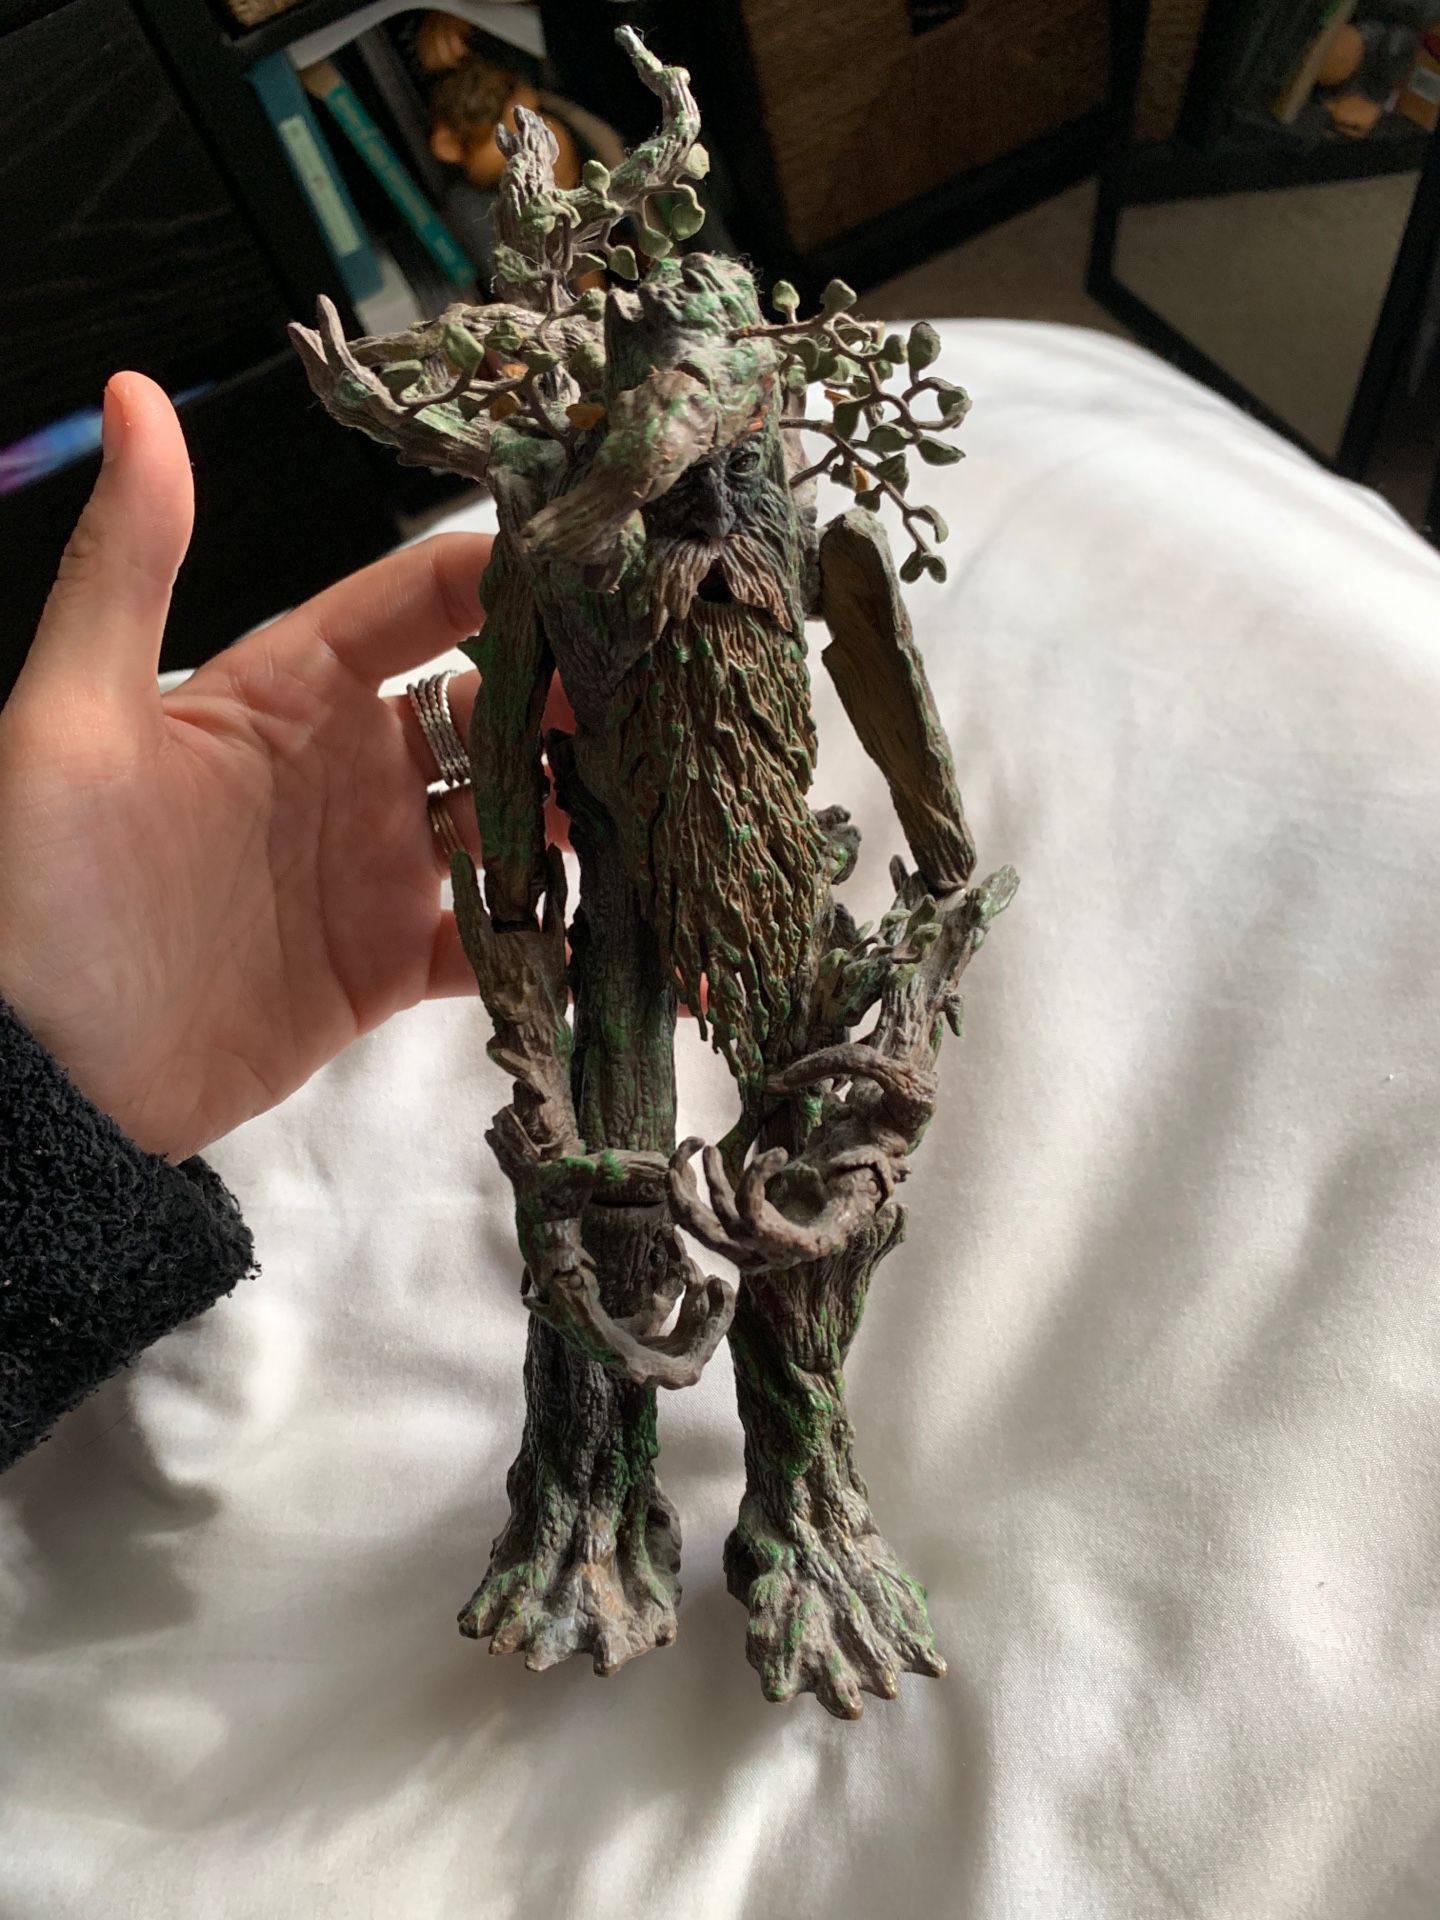 Lord of the rings Treebeard action figure